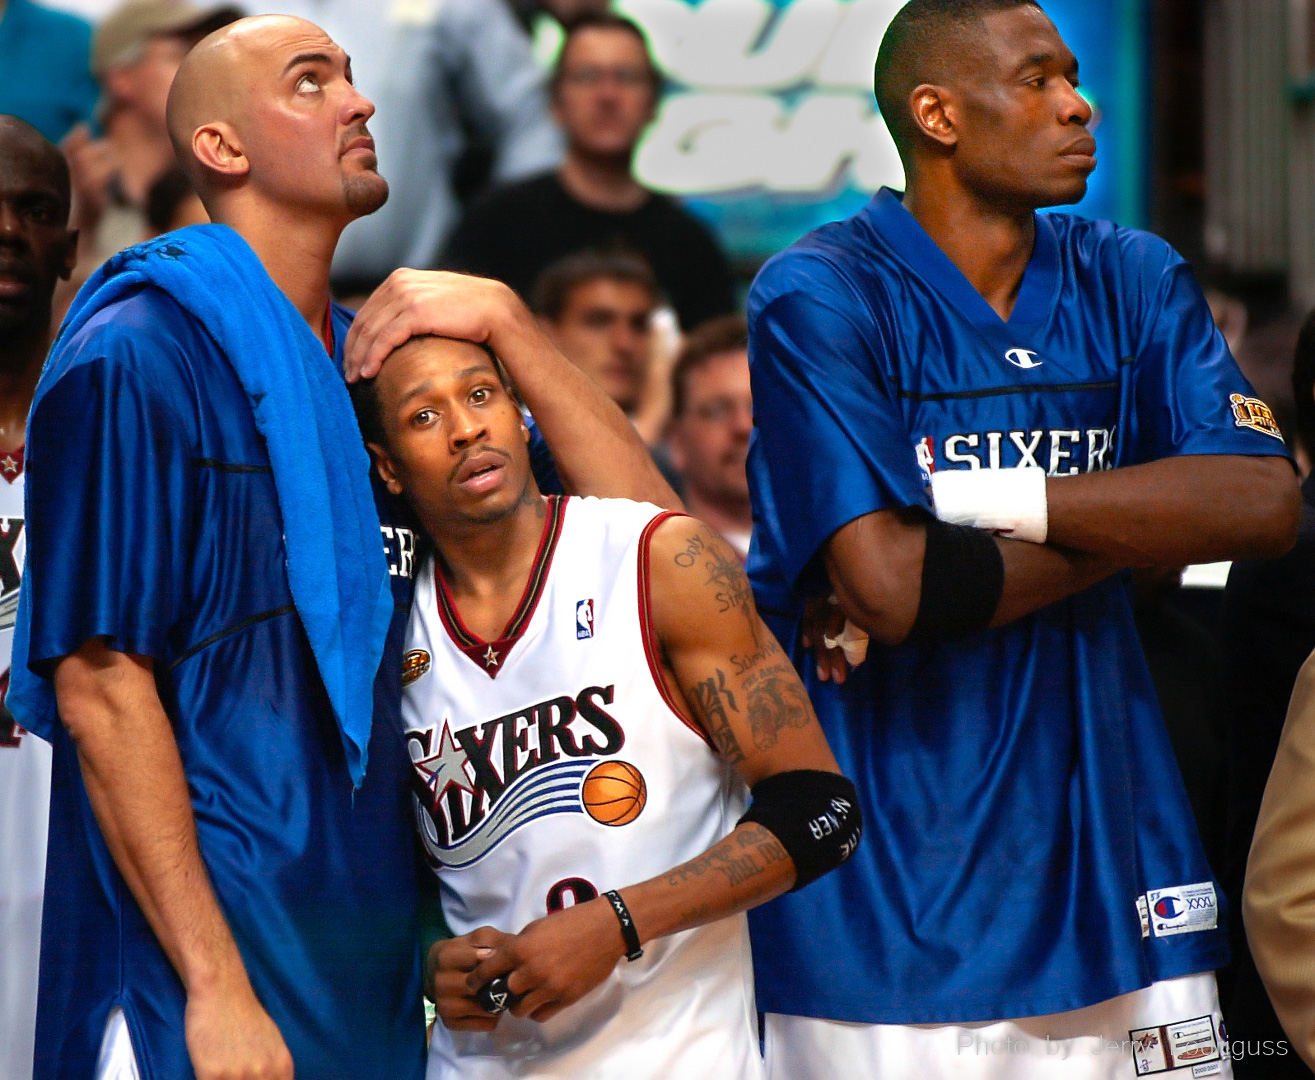 Philadlephia 76ers Matt Geiger consoles teammate Allen Iverson in the closing seconds of their loss to the Los Angeles Lakers in the final game of the NBA Championship Finals on June 15, 2001.